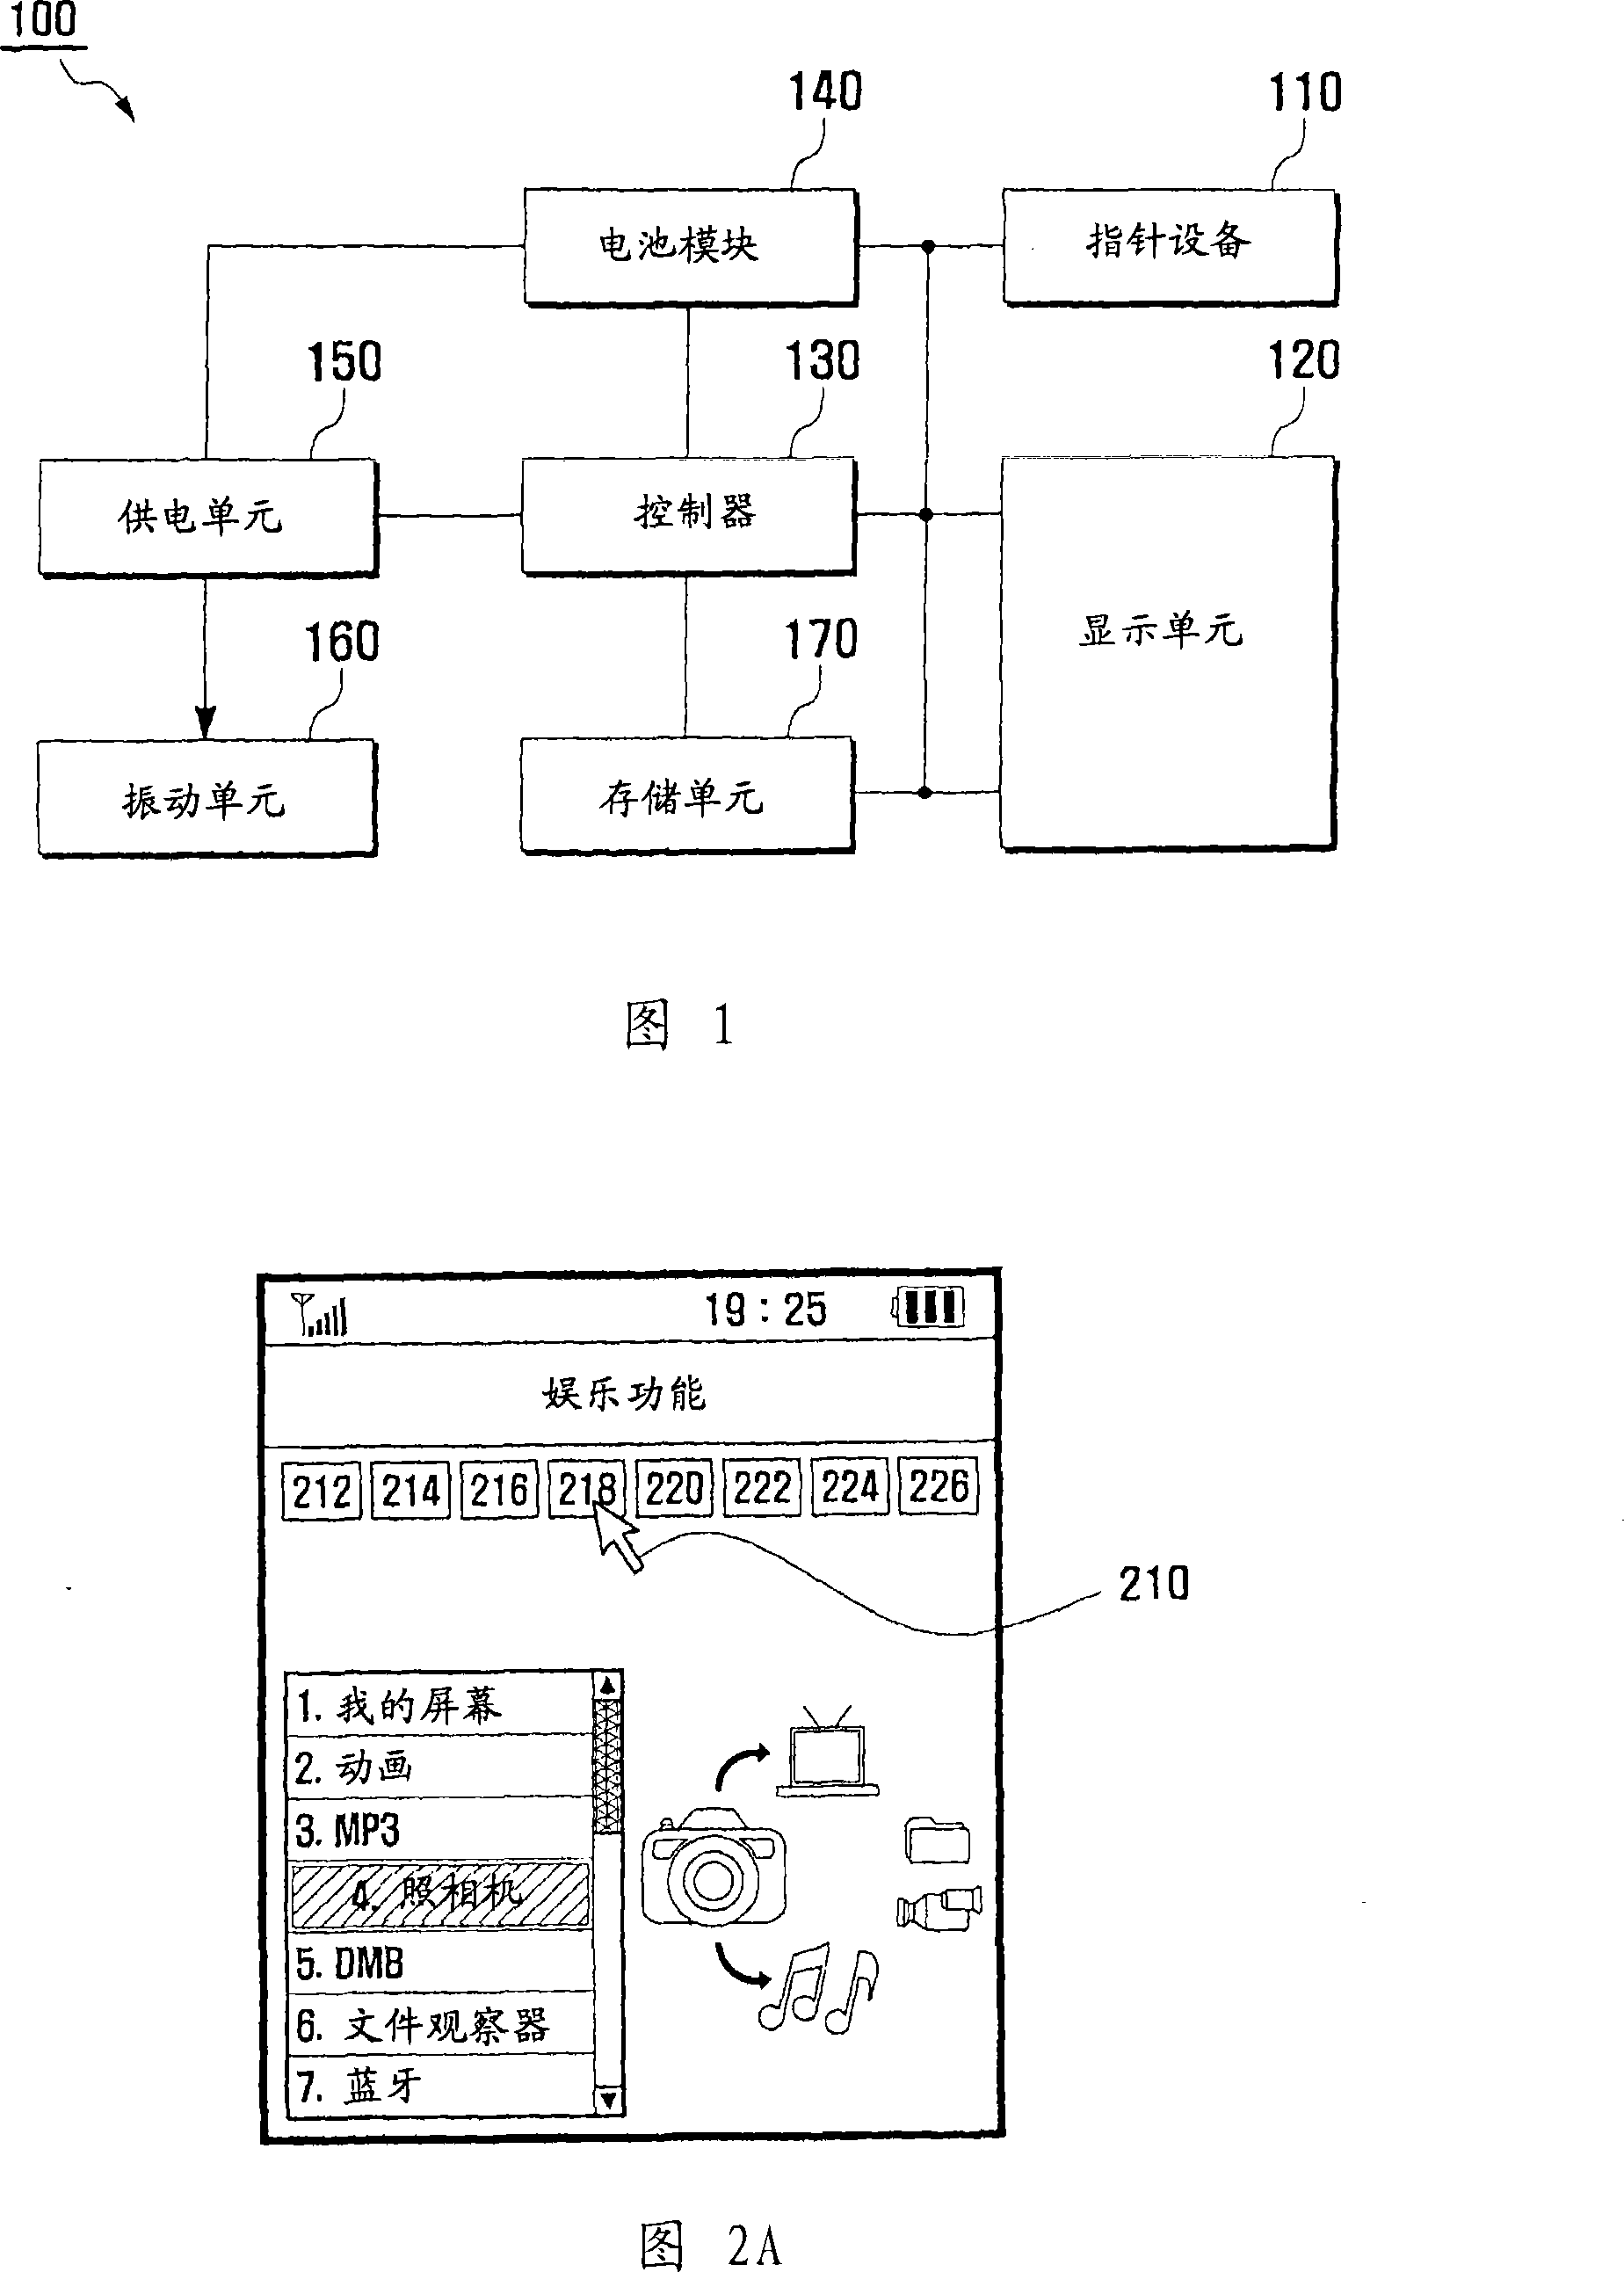 Device and method for providing haptic user interface in mobile terminal